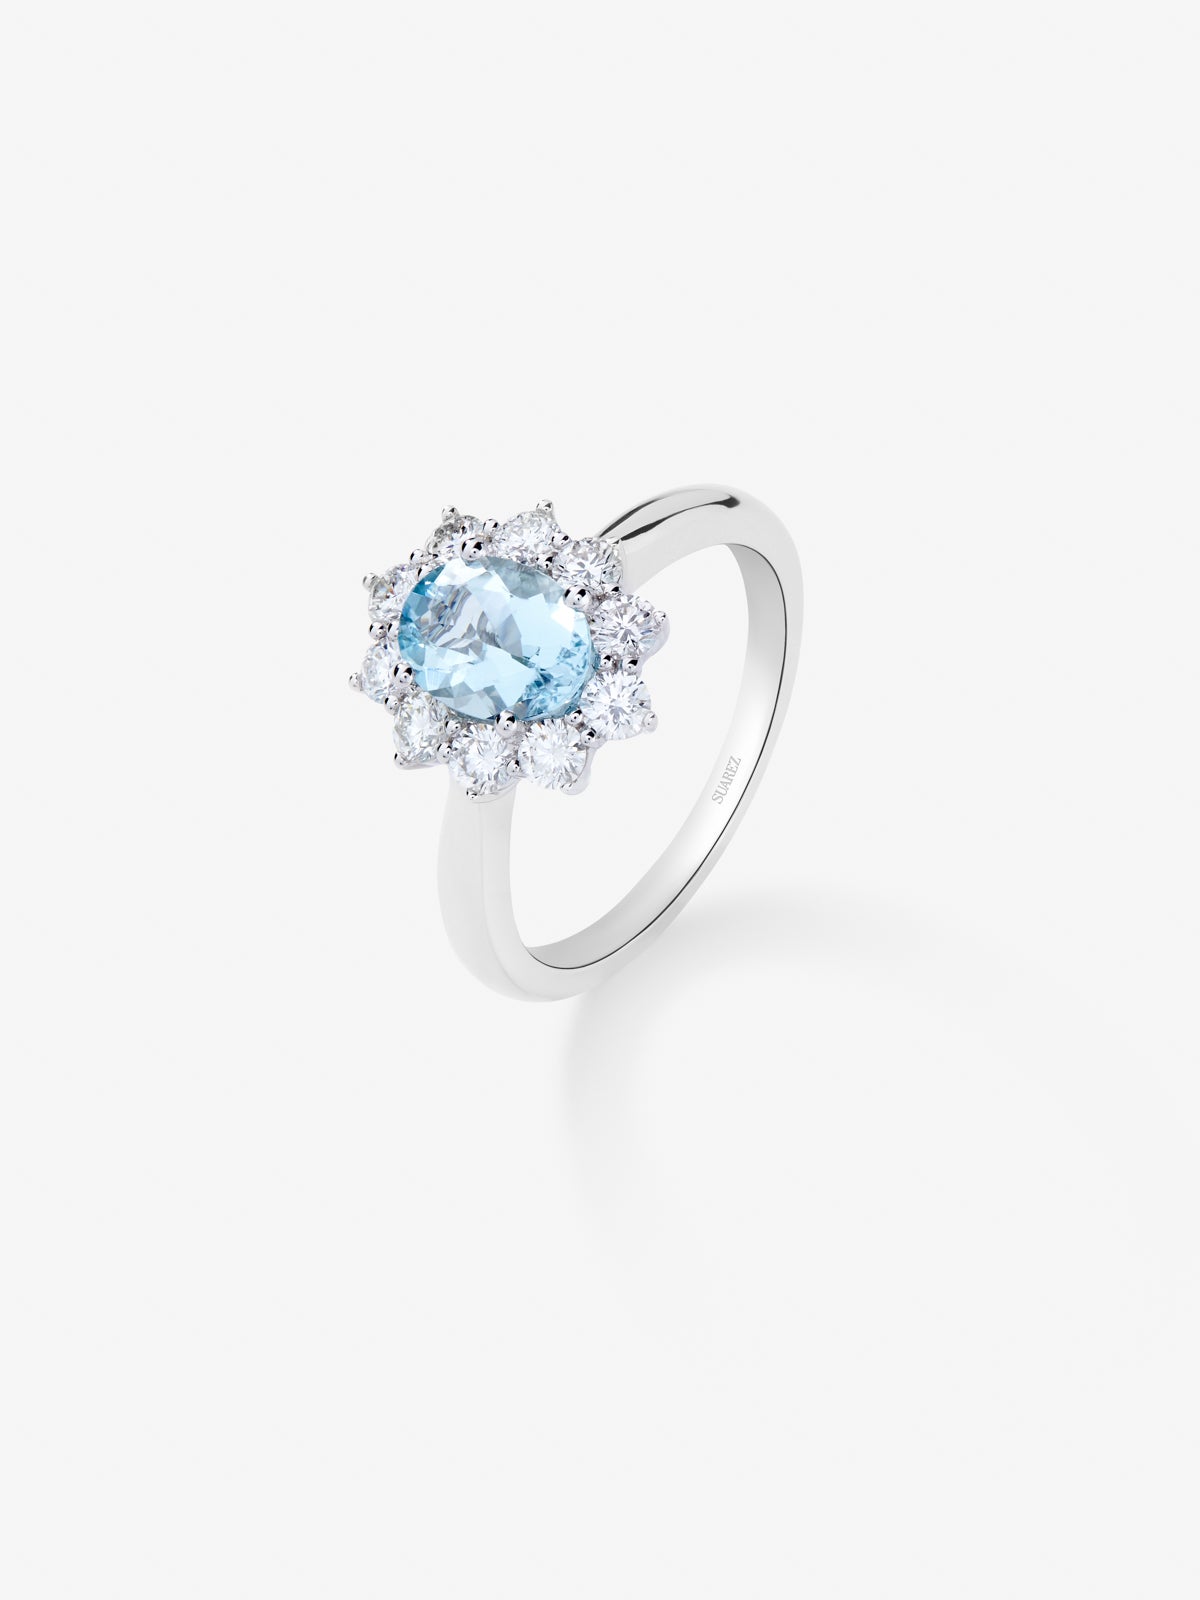 18K White Gold Ring with Aguamarine in 2.26 cts and white diamonds in bright size